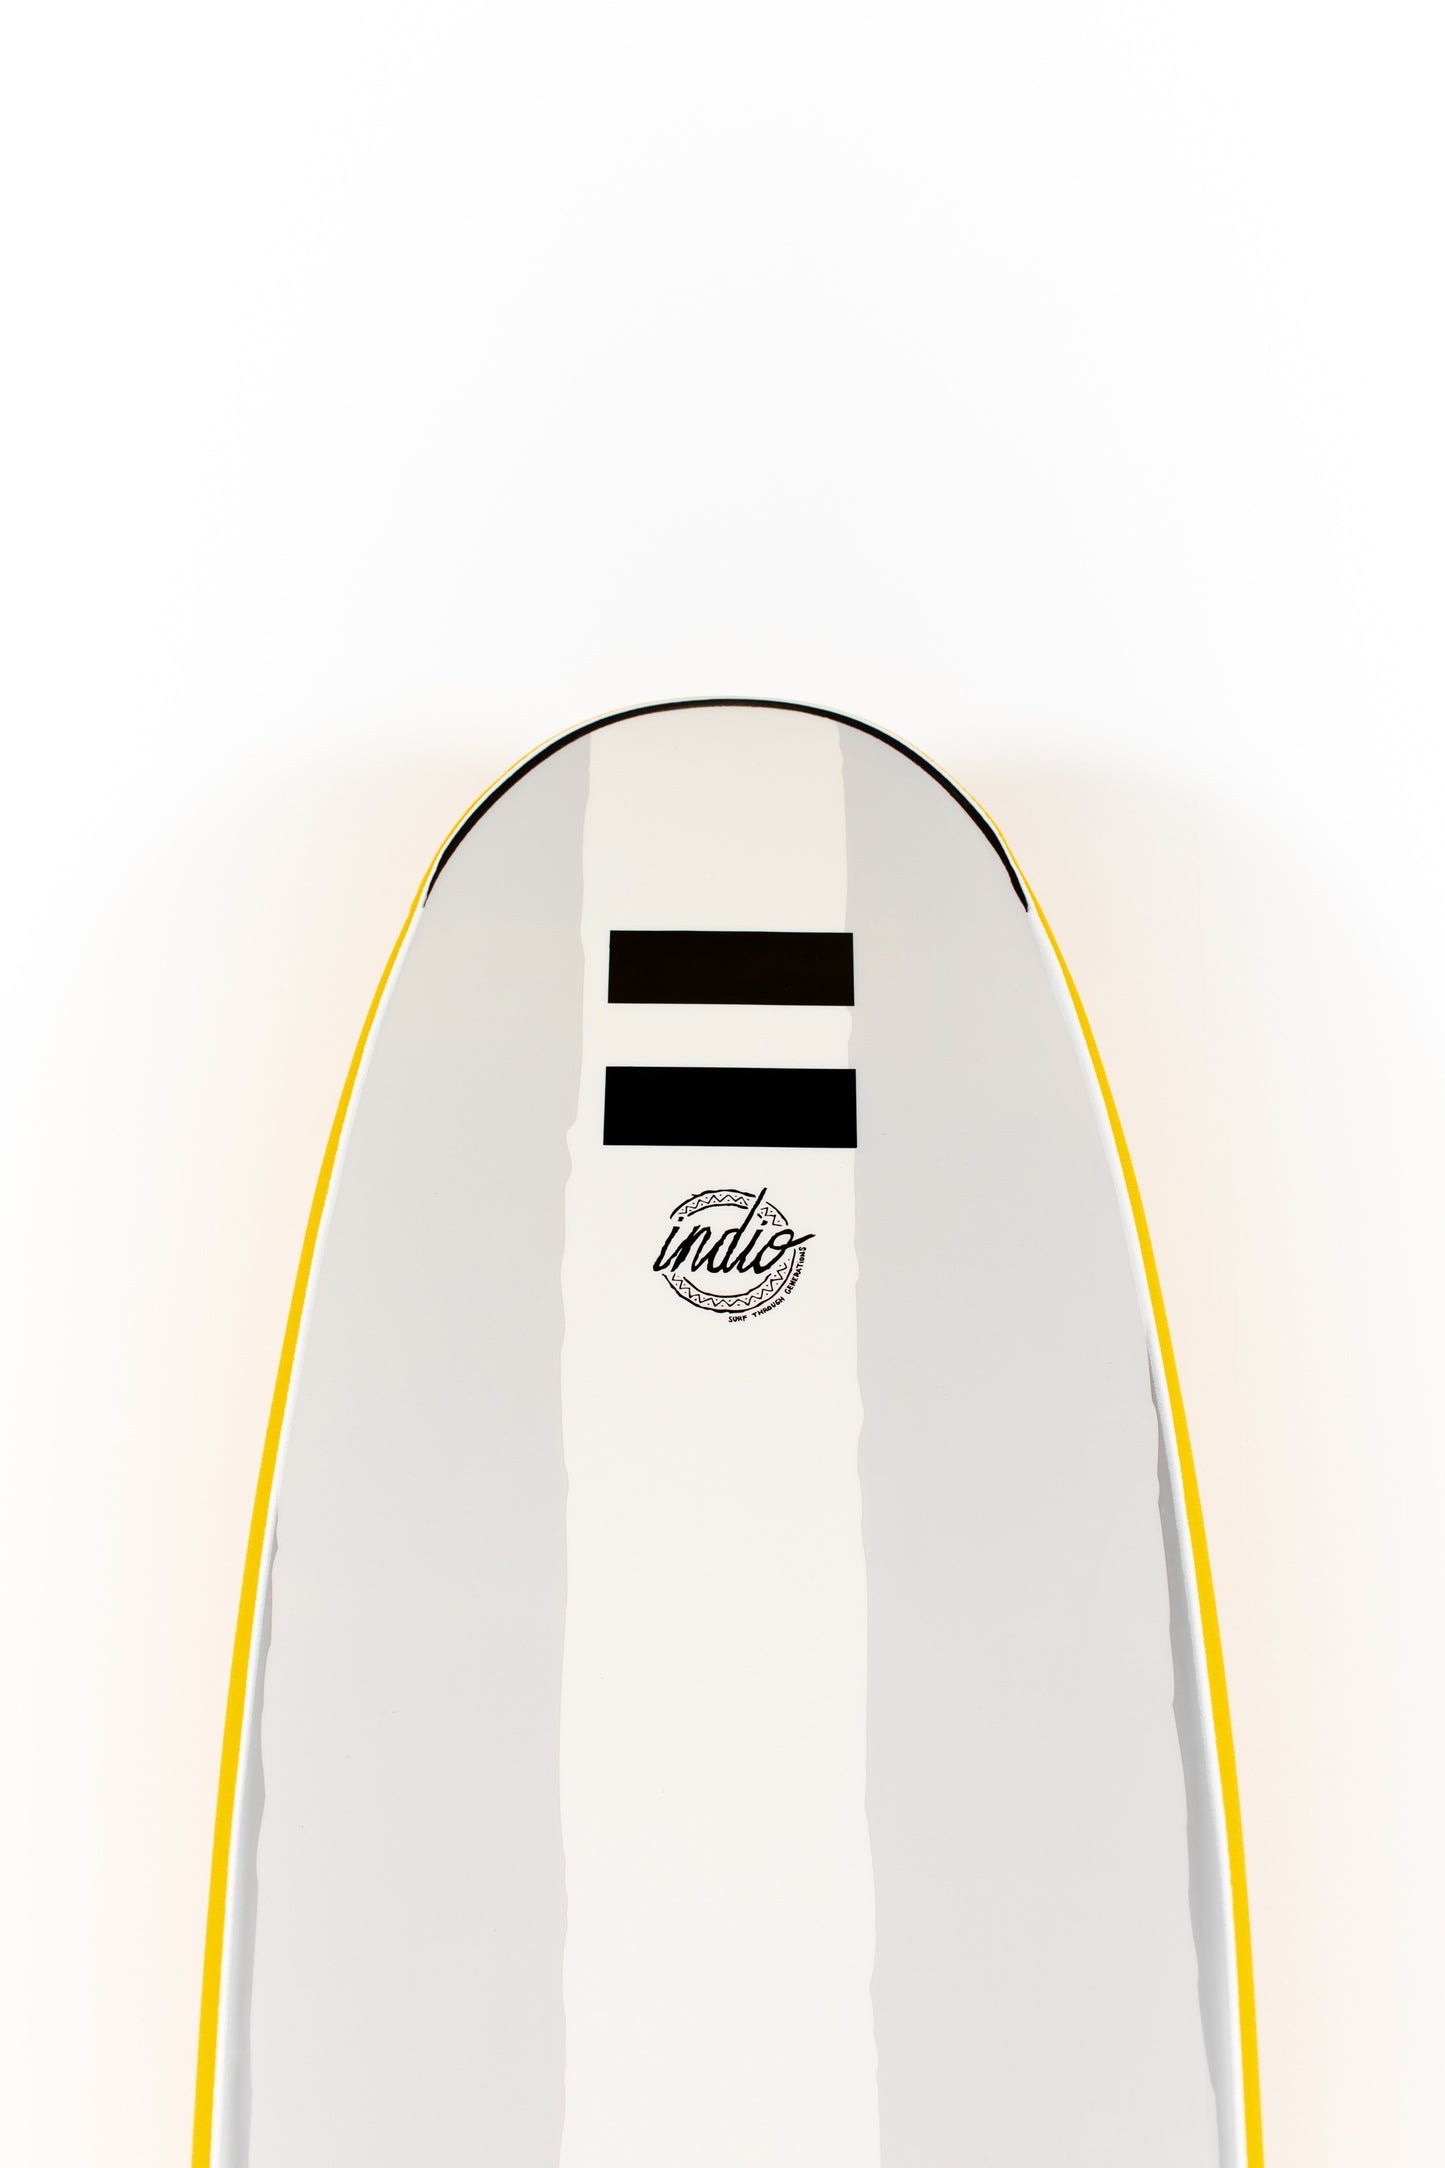 
                  
                    Pukas-Surf-Shop-Indio-Surfboards-Softboards-Step-Up
                  
                